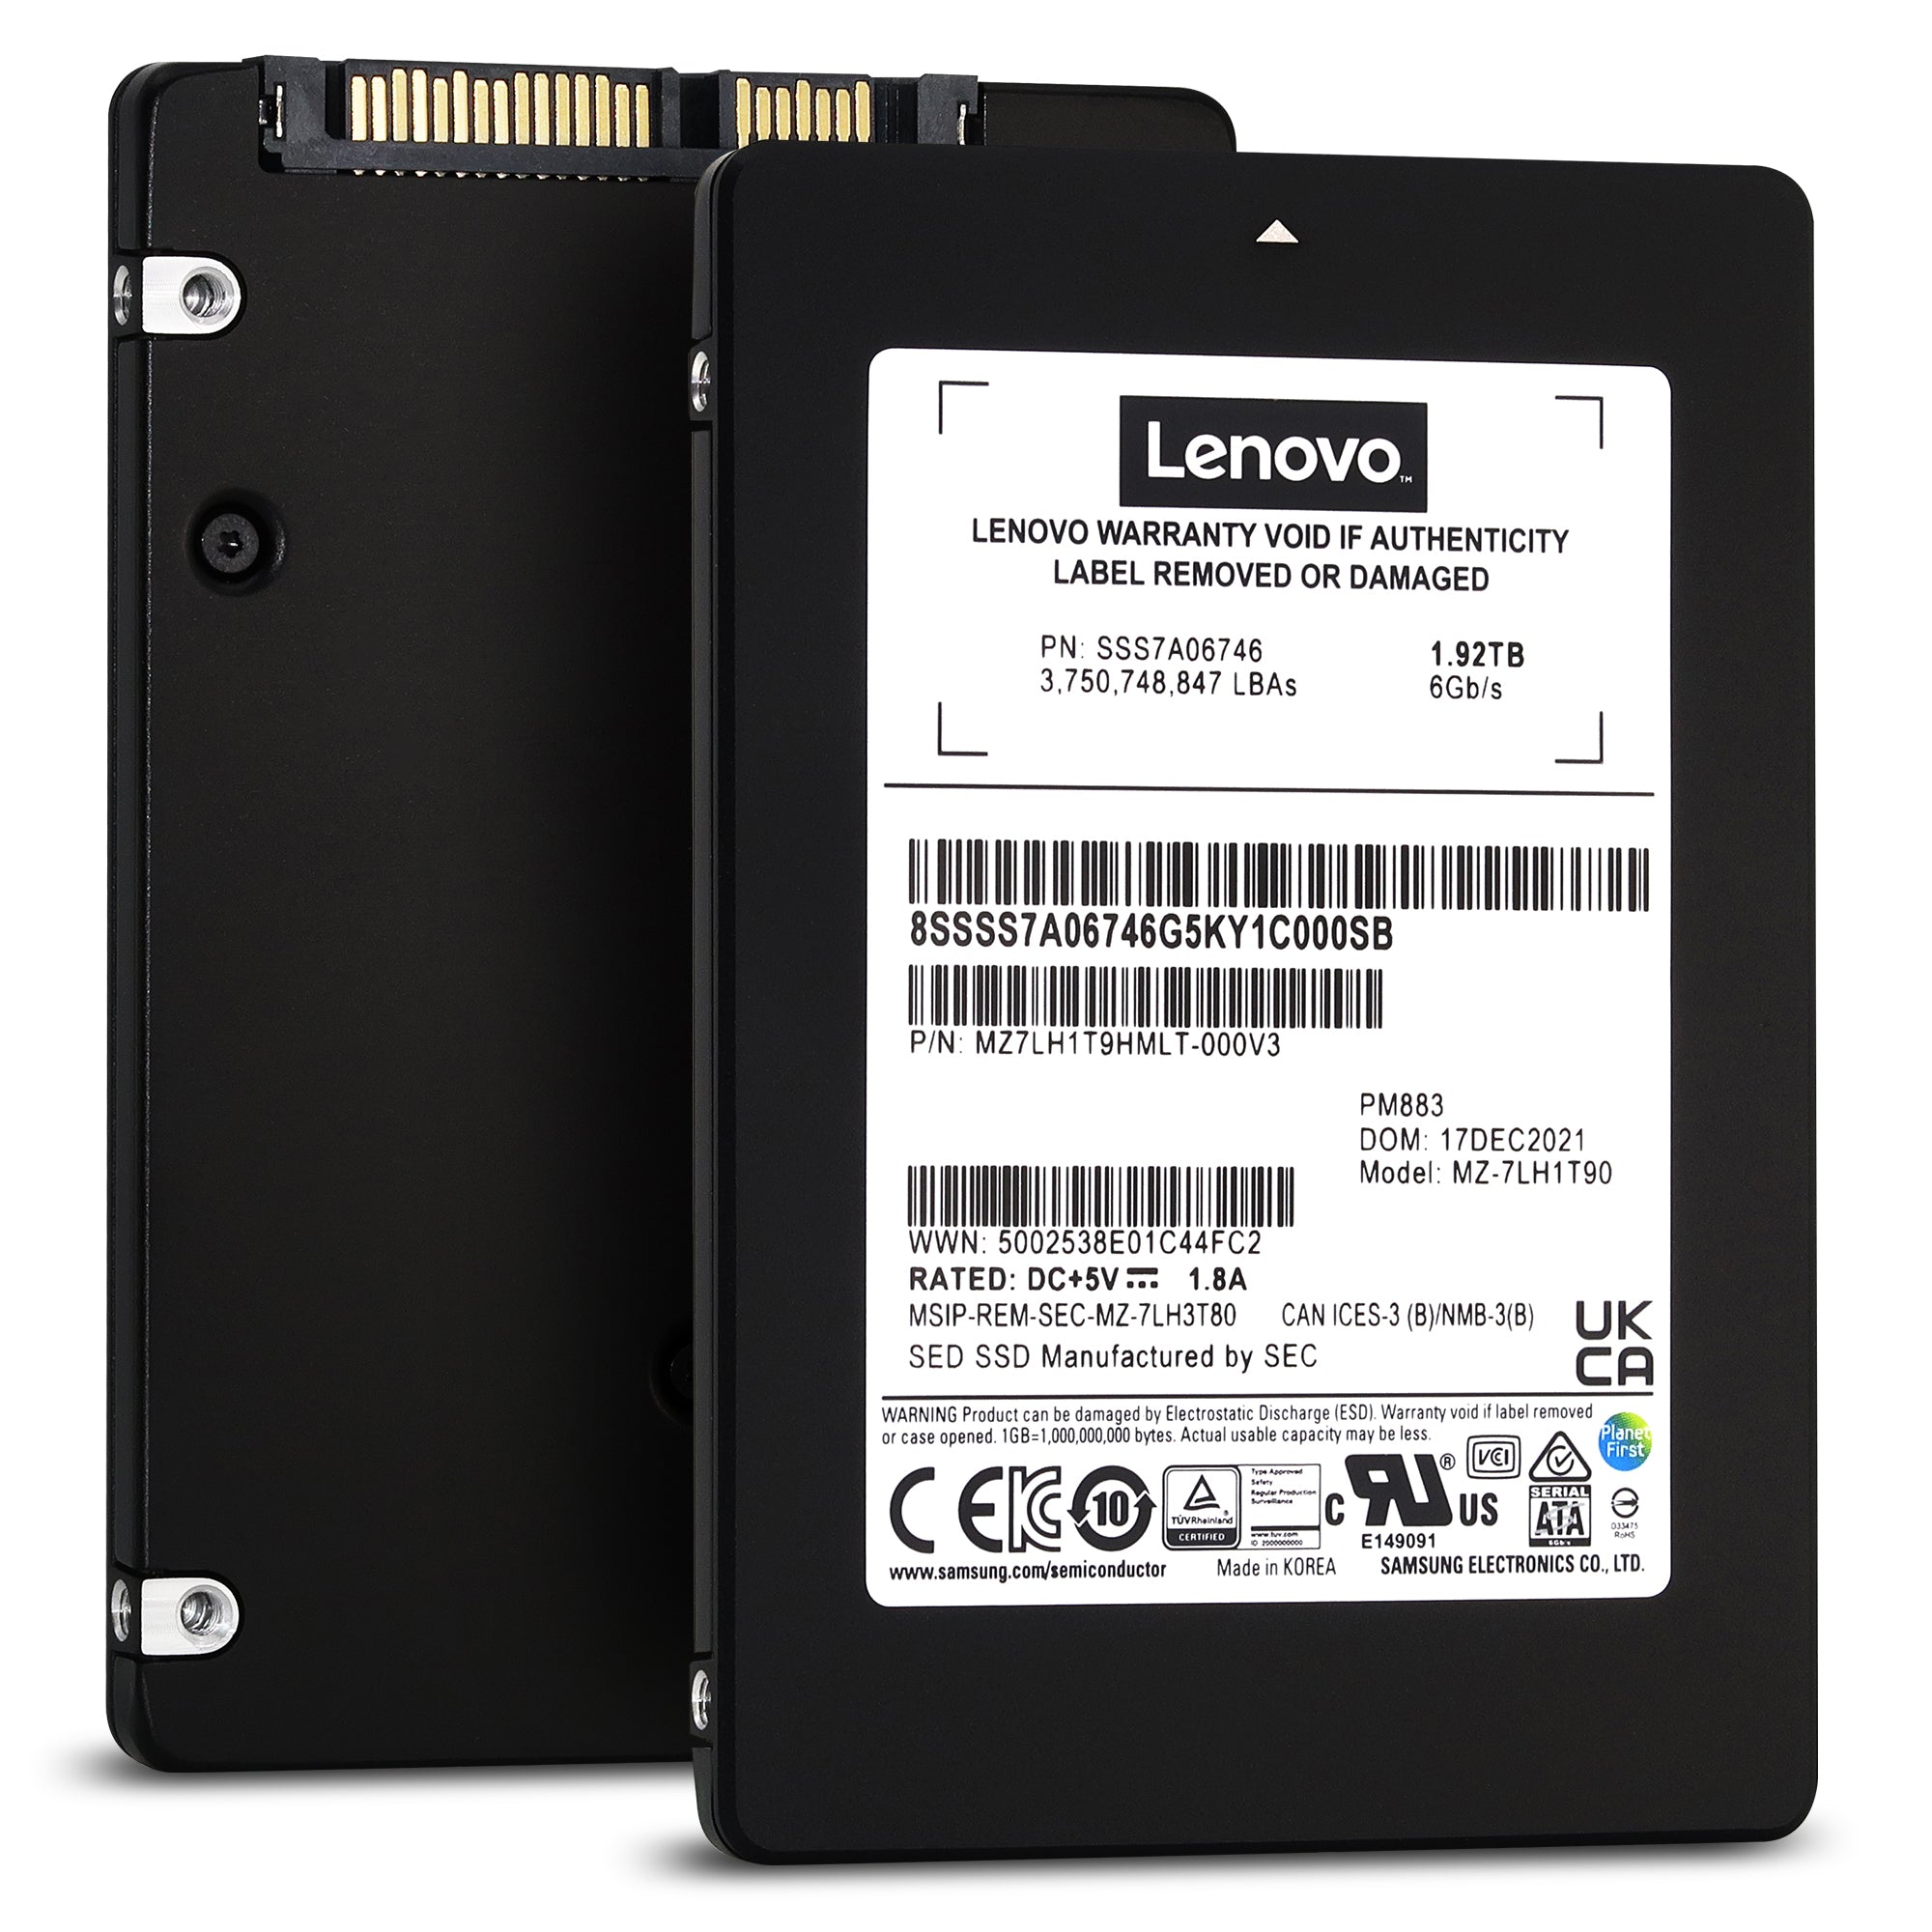 Lenovo PM883 MZ7LH1T9HMLT SSS7A06746 1.92TB SATA 6Gb/s 3D TLC 1.3DWPD 2.5in Recertified Solid State Drive